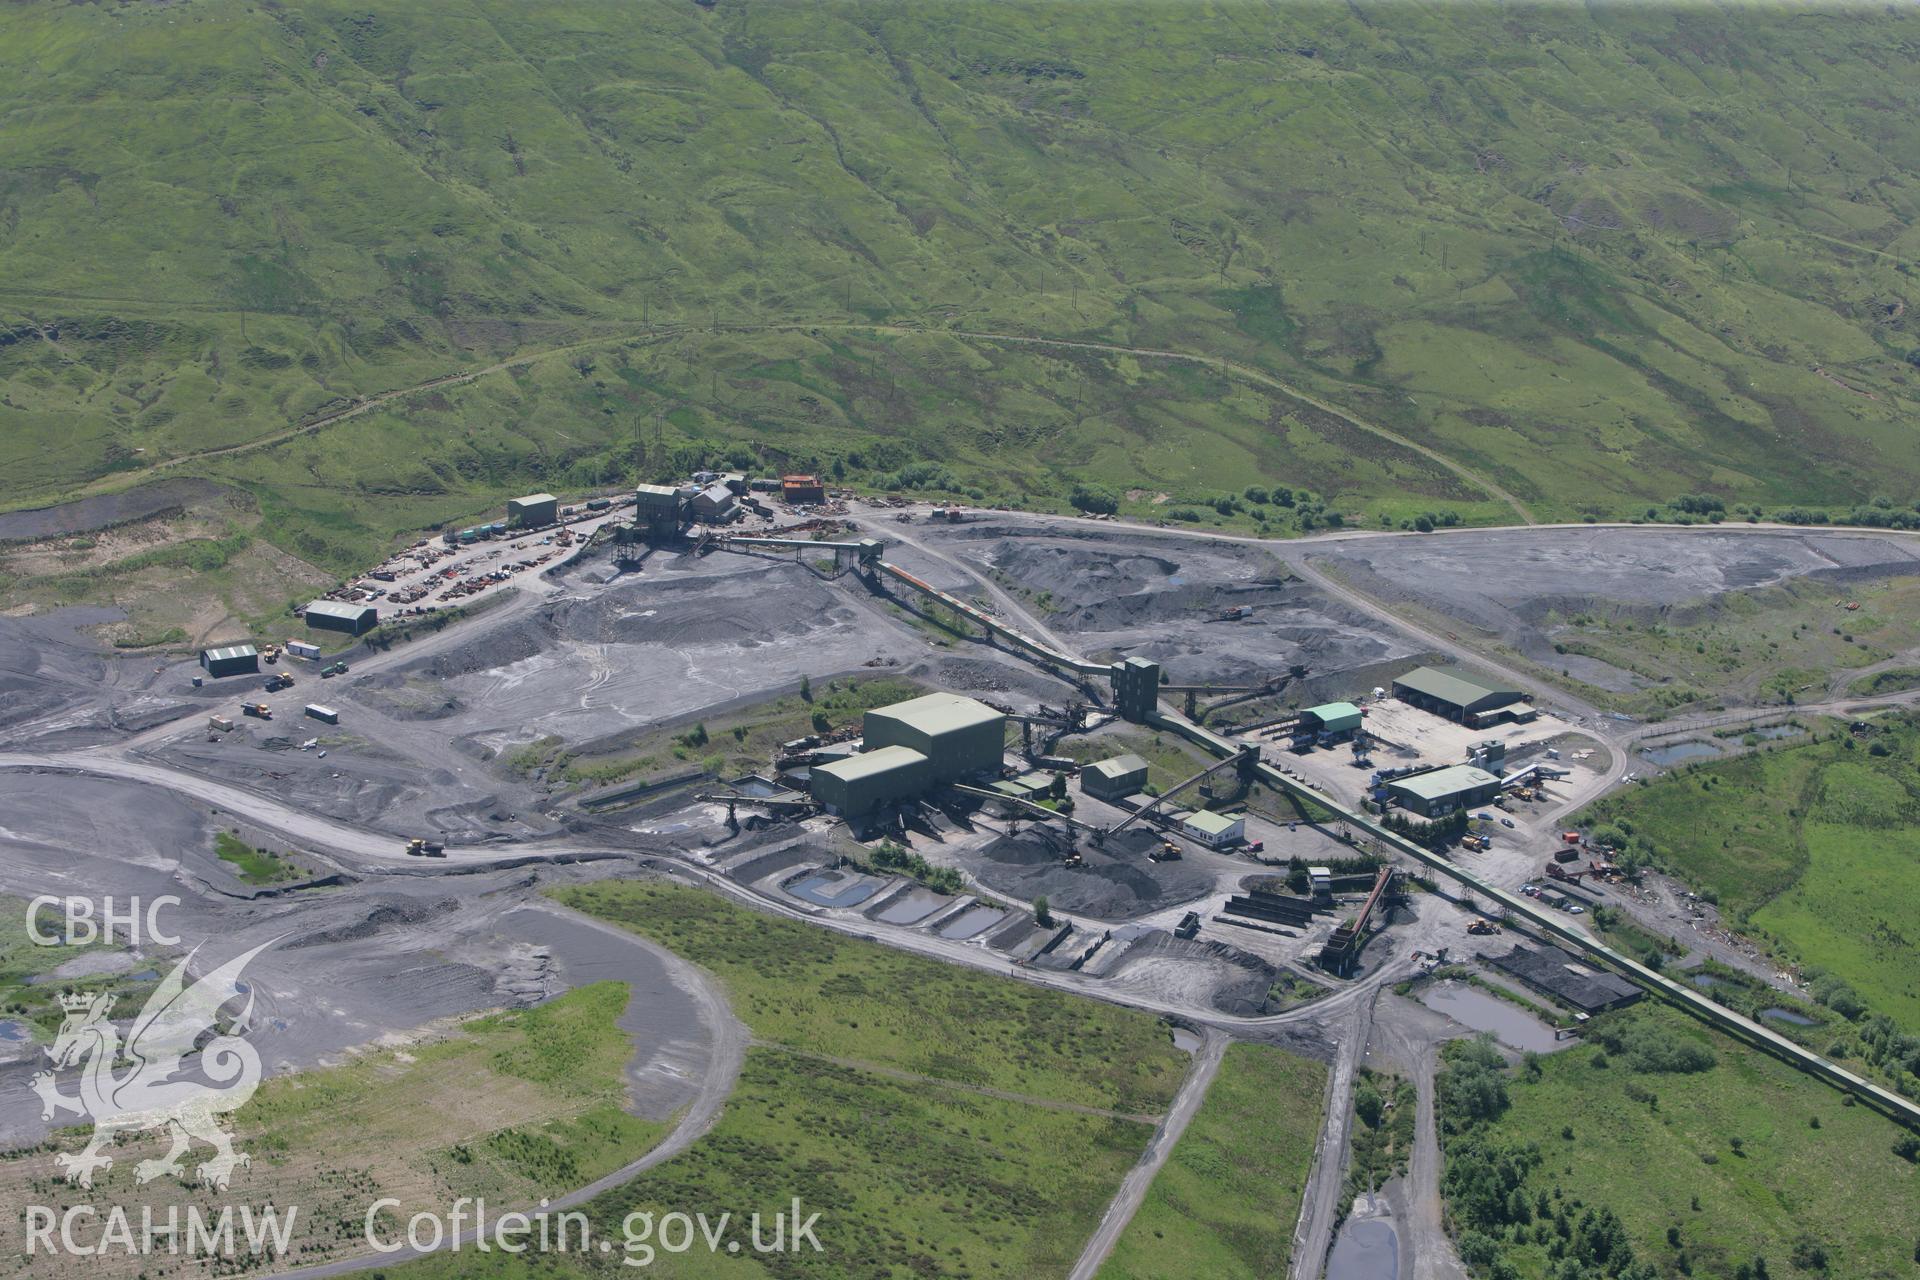 RCAHMW colour oblique photograph of Tower Drift Mine, part of Tower Colliery. Taken by Toby Driver on 09/06/2008.